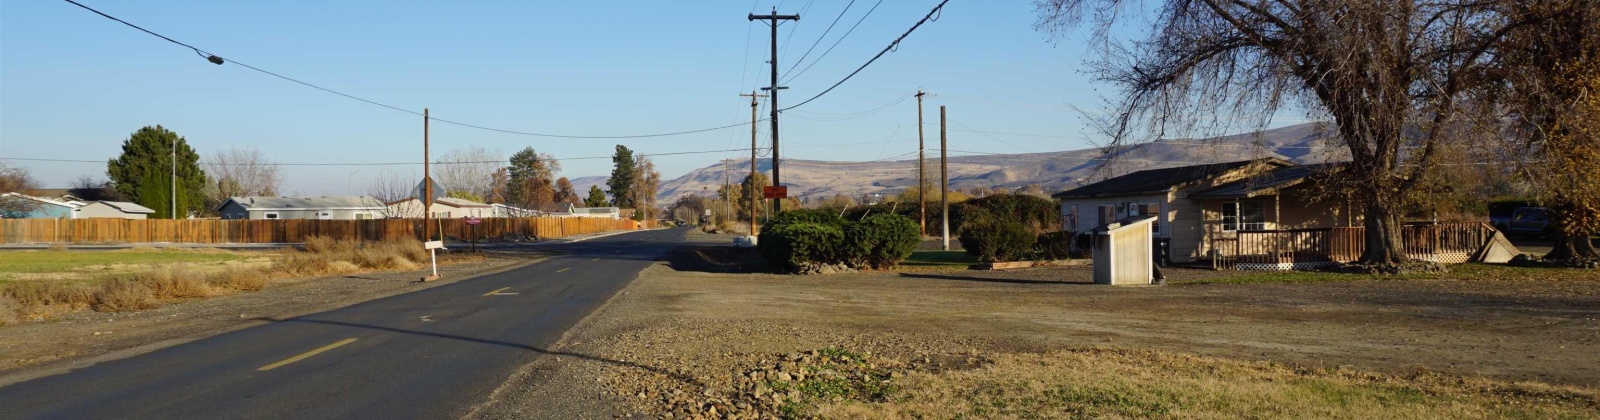 Old Inland Empire Hwy, Prosser, Washington 99350, 2 Bedrooms Bedrooms, ,1 BathroomBathrooms,Single Family,For Sale,Old Inland Empire Hwy,273710